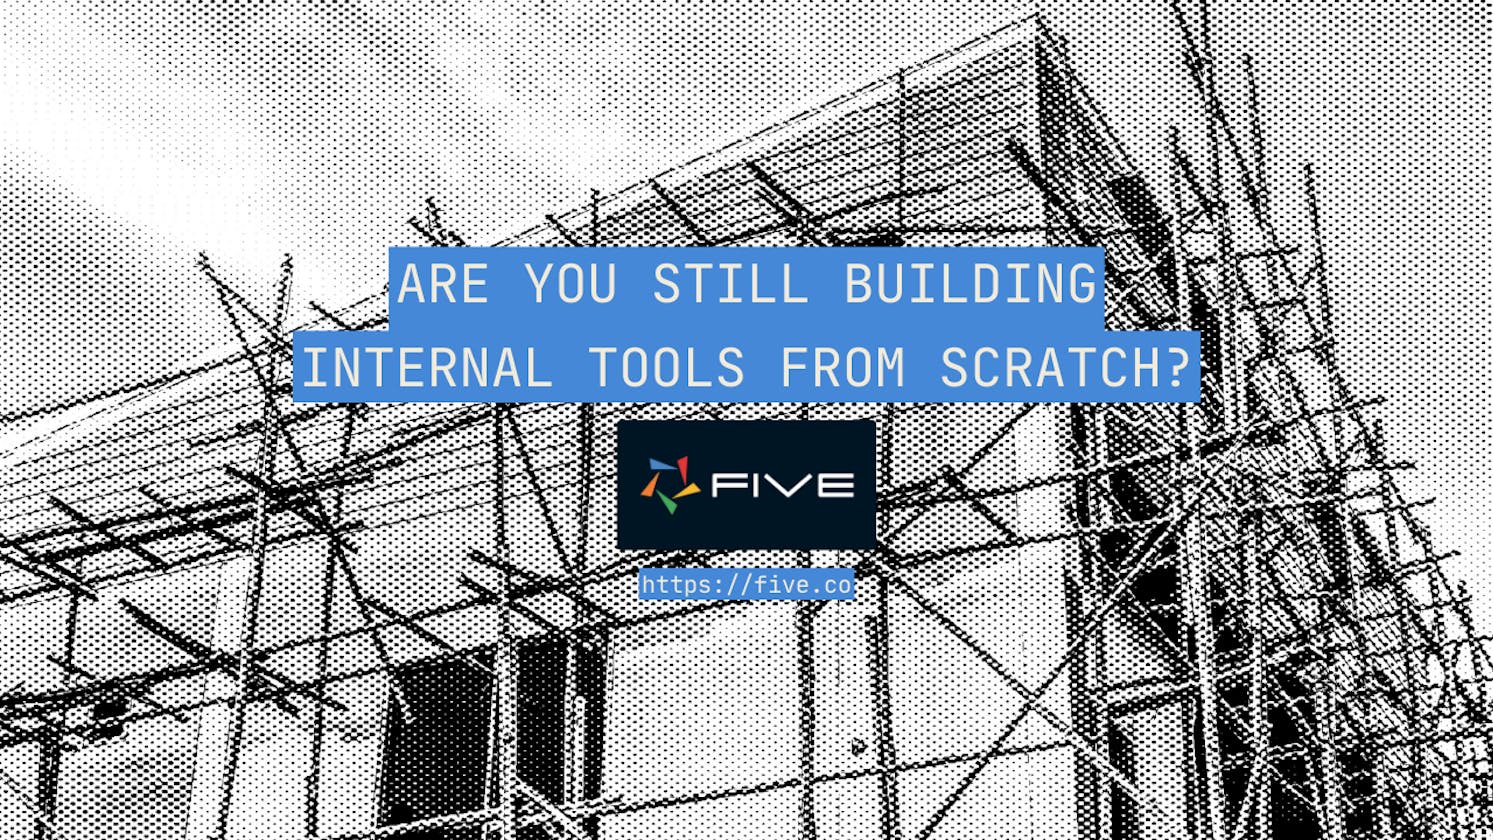 Are You Still Building Internal Tools From Scratch in 2023?